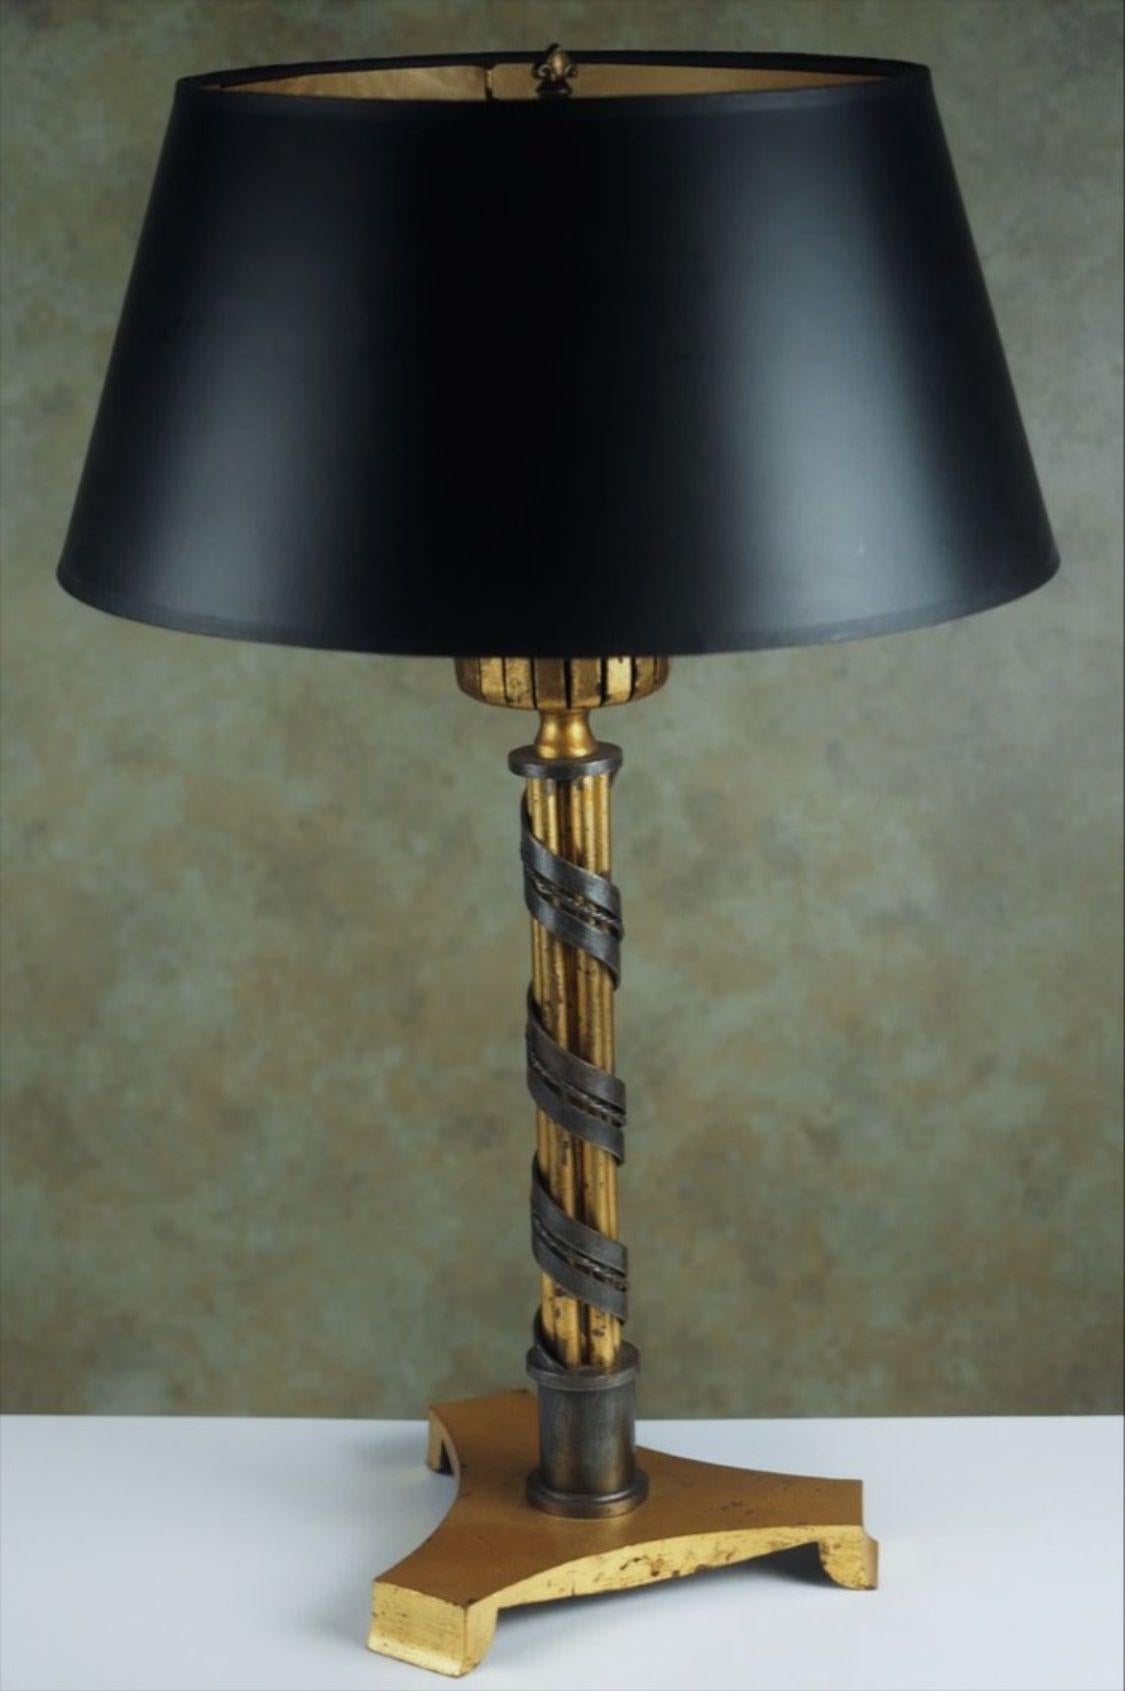 French, 1940s Art Deco table lamp in gilt and patinated forged iron by Raymond Subes, circa 1945. Measures: 23” high overall.